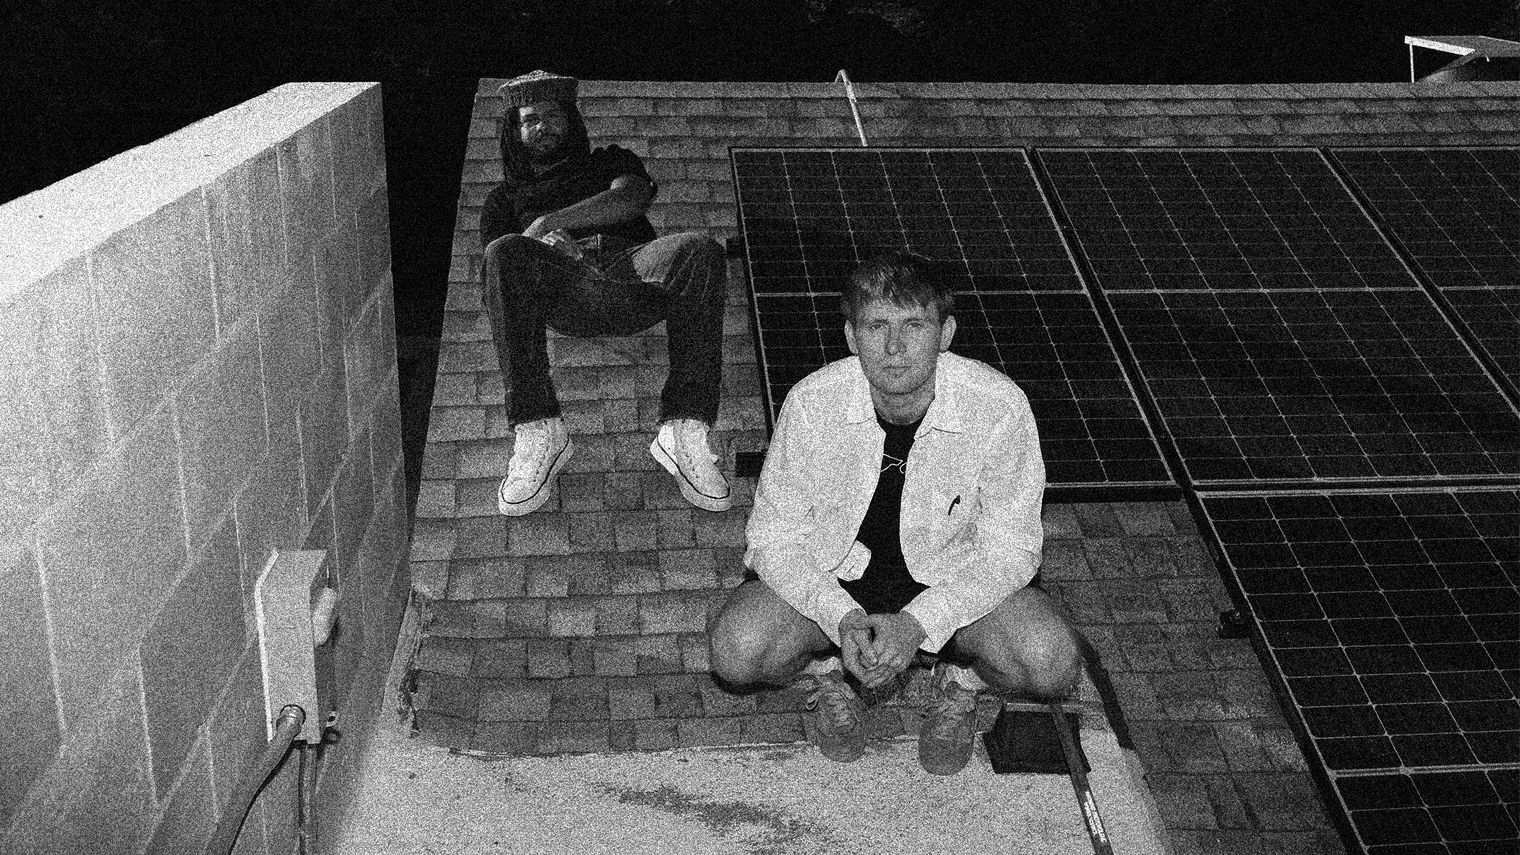 Members of Injury Reserve sit and squat on a tiled roof, beside them are several solar panels.